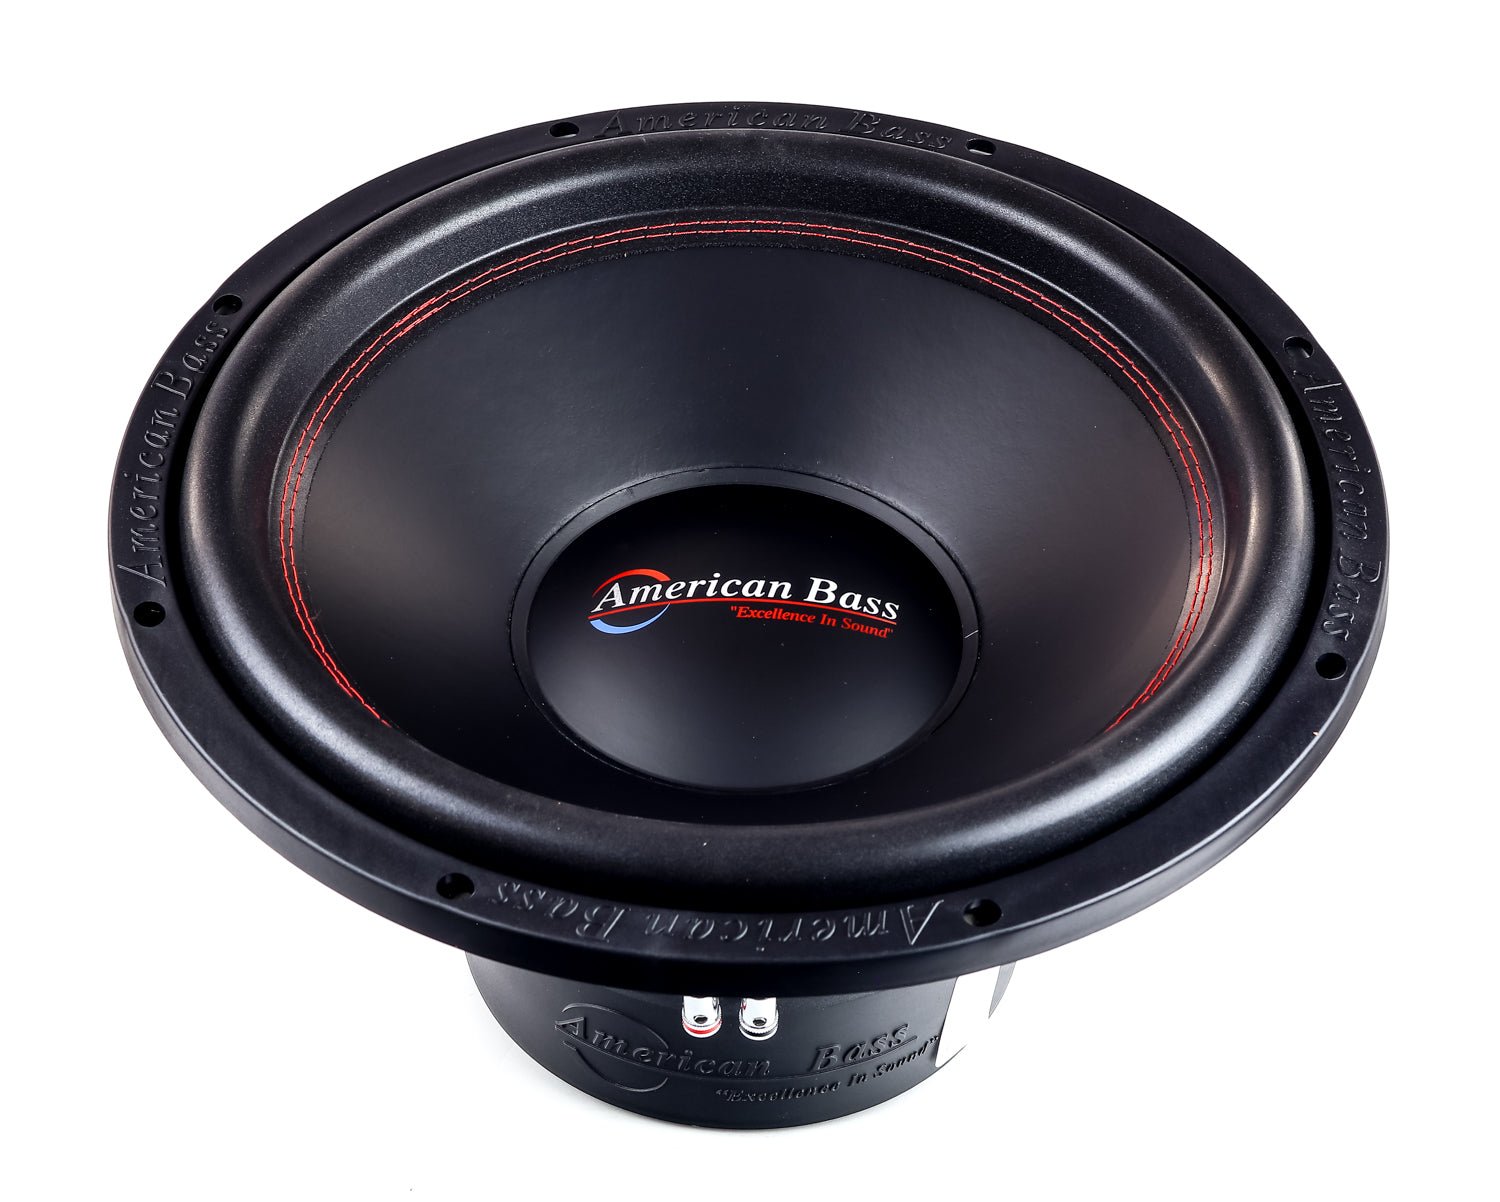 XD 15" Subwoofer - American Bass Audio